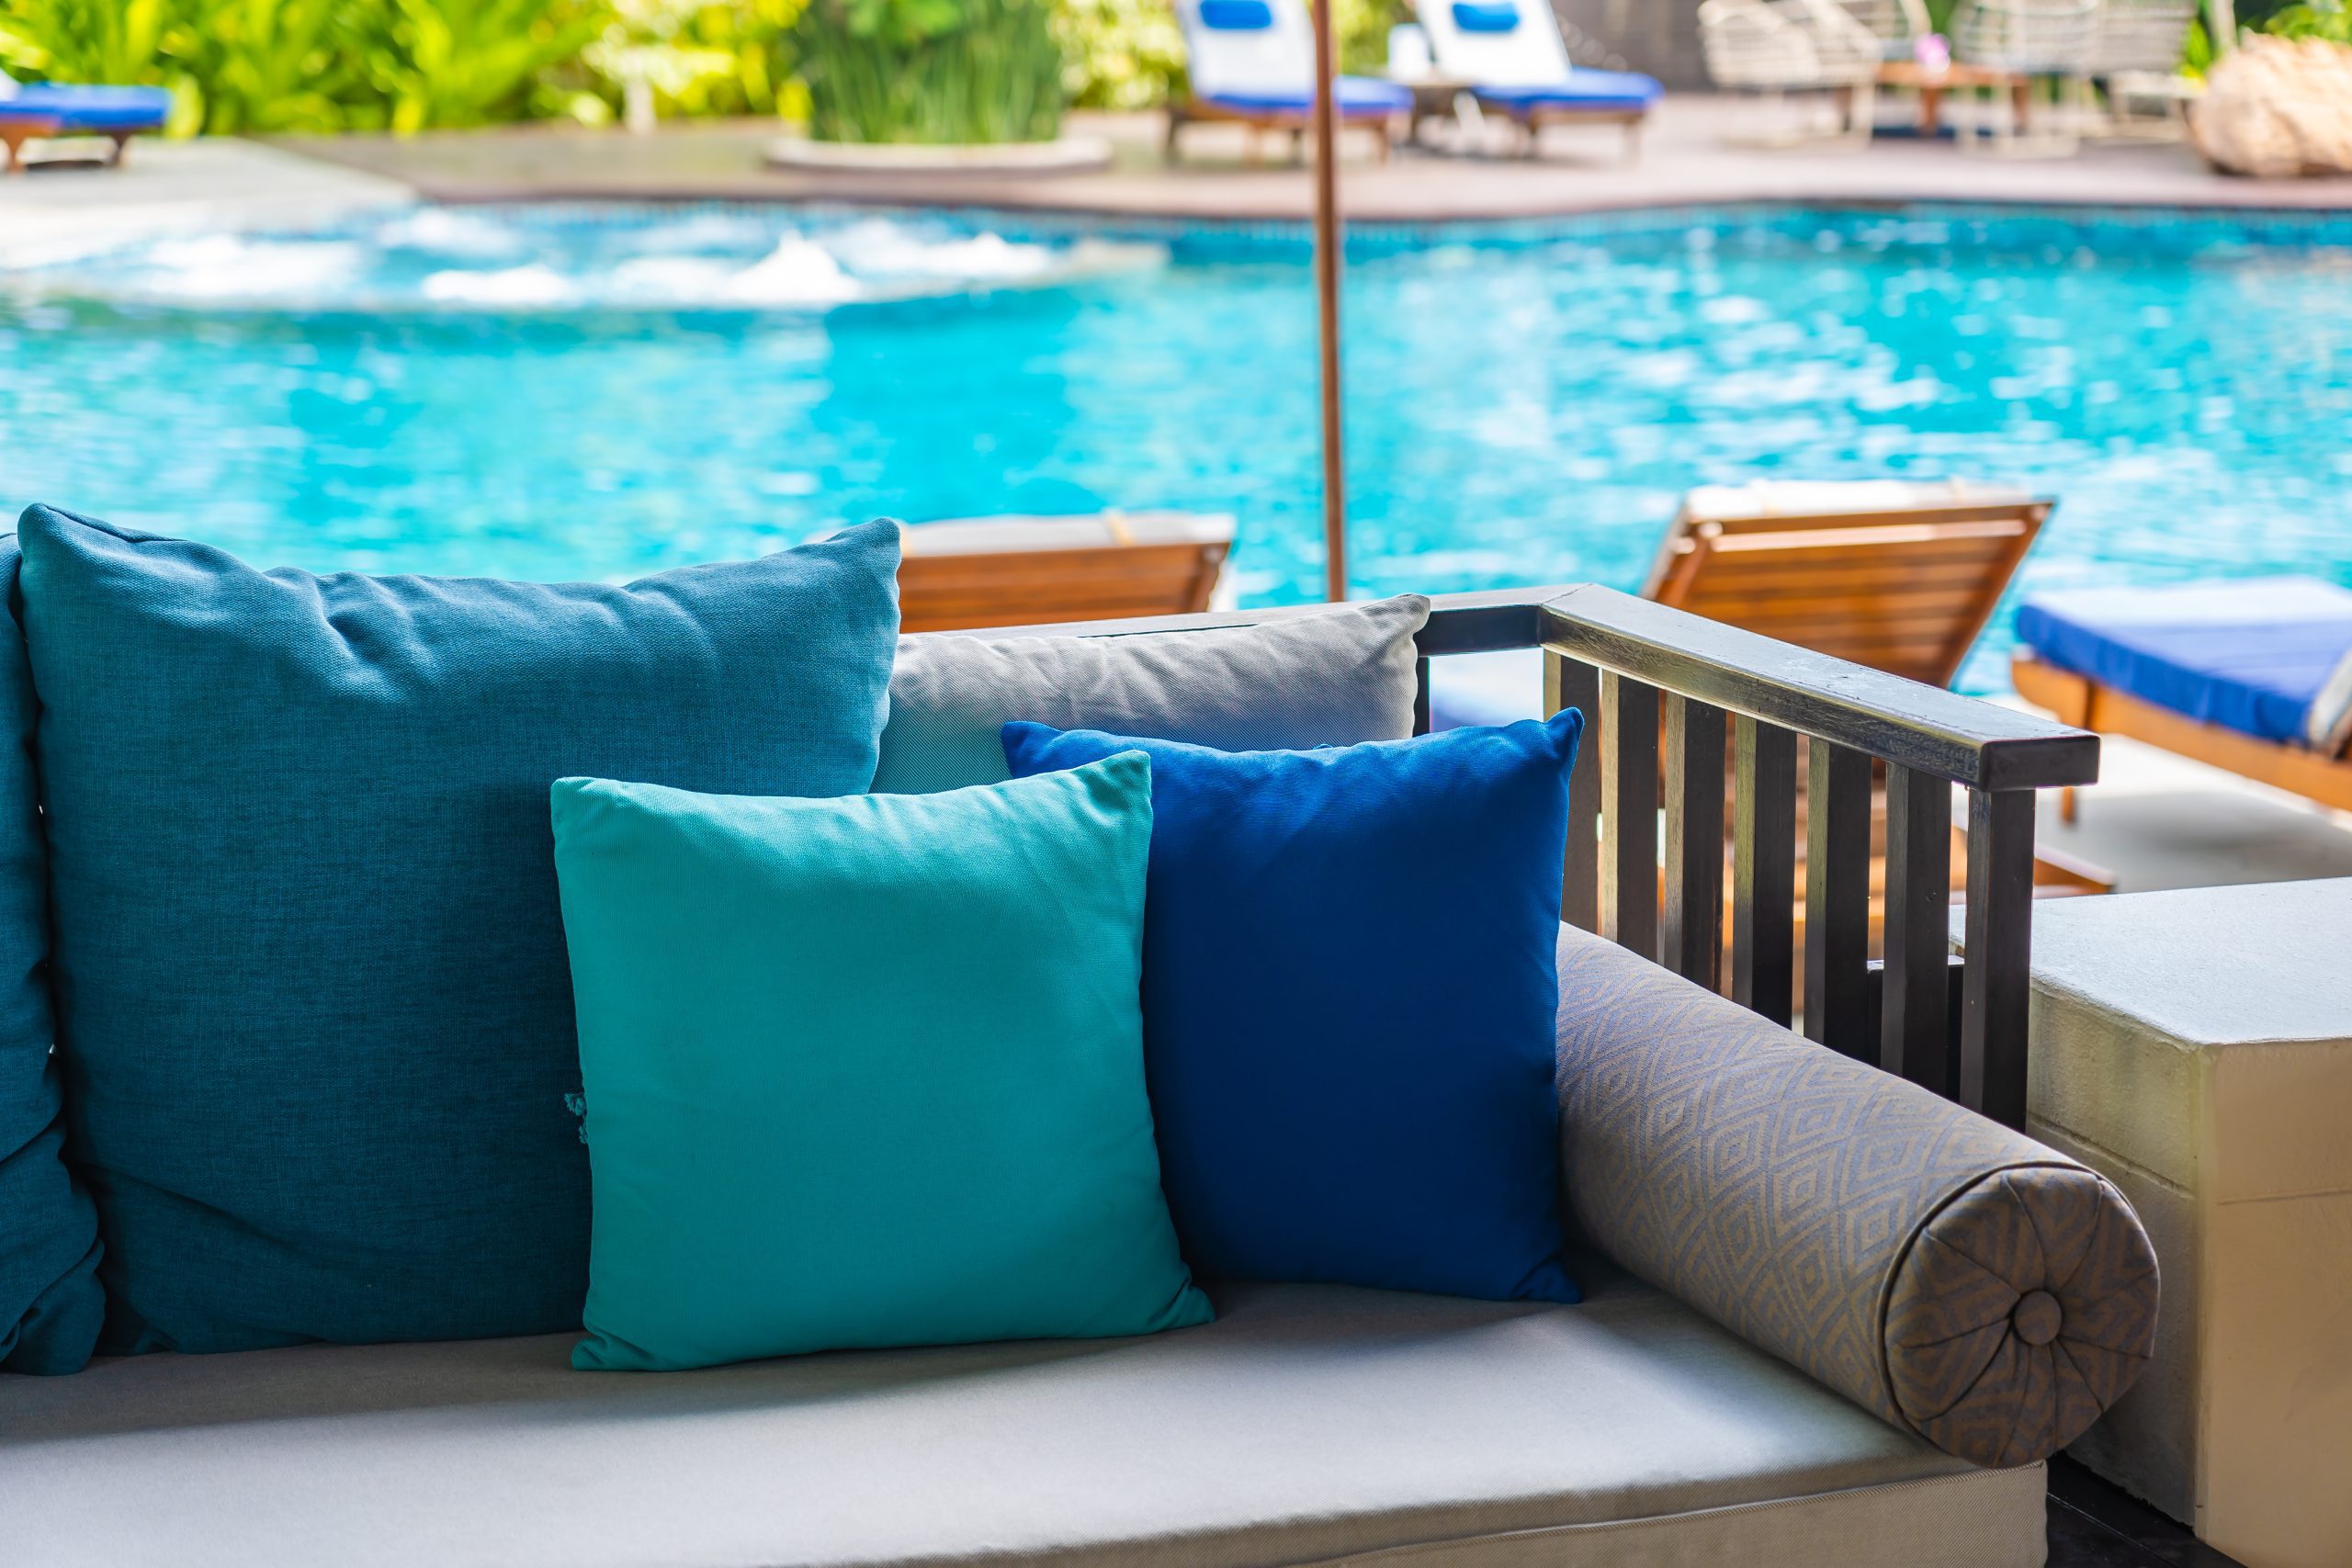 Throw pillows in different shades of blue on gray outdoor furniture